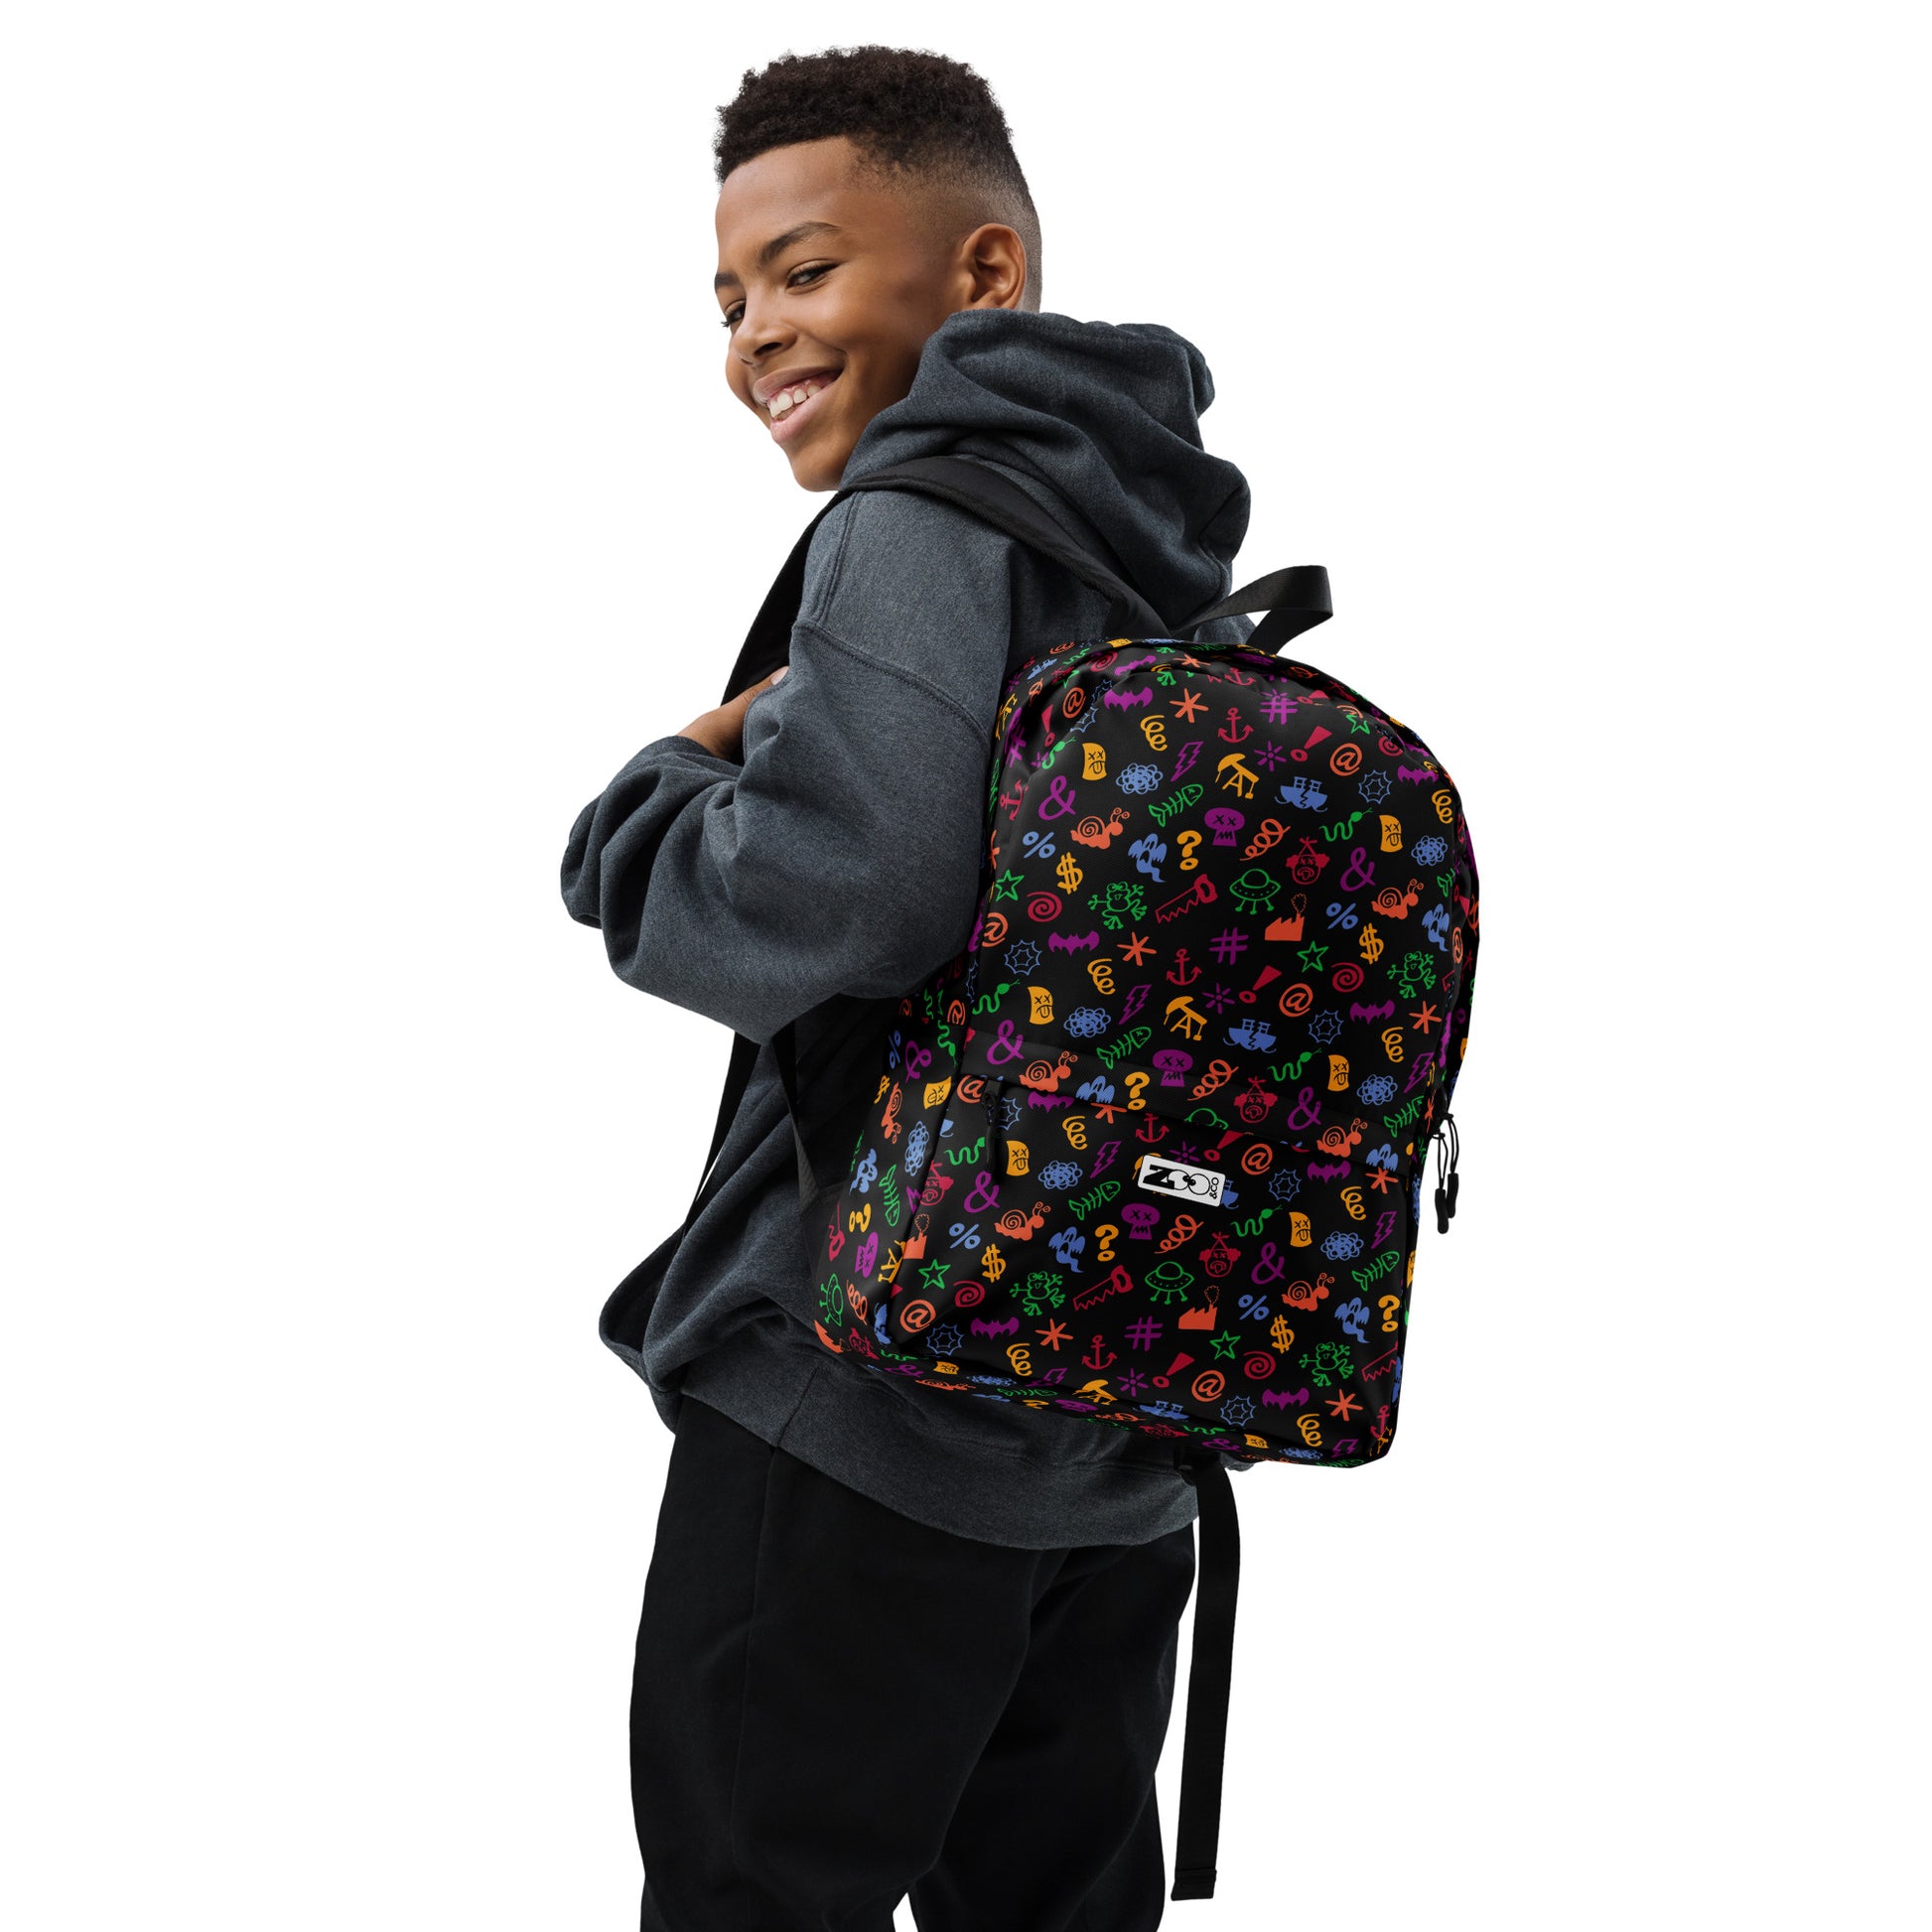 Take this graphic bad words Backpack with you, swear with confidence, keep your smile. Lifestyle